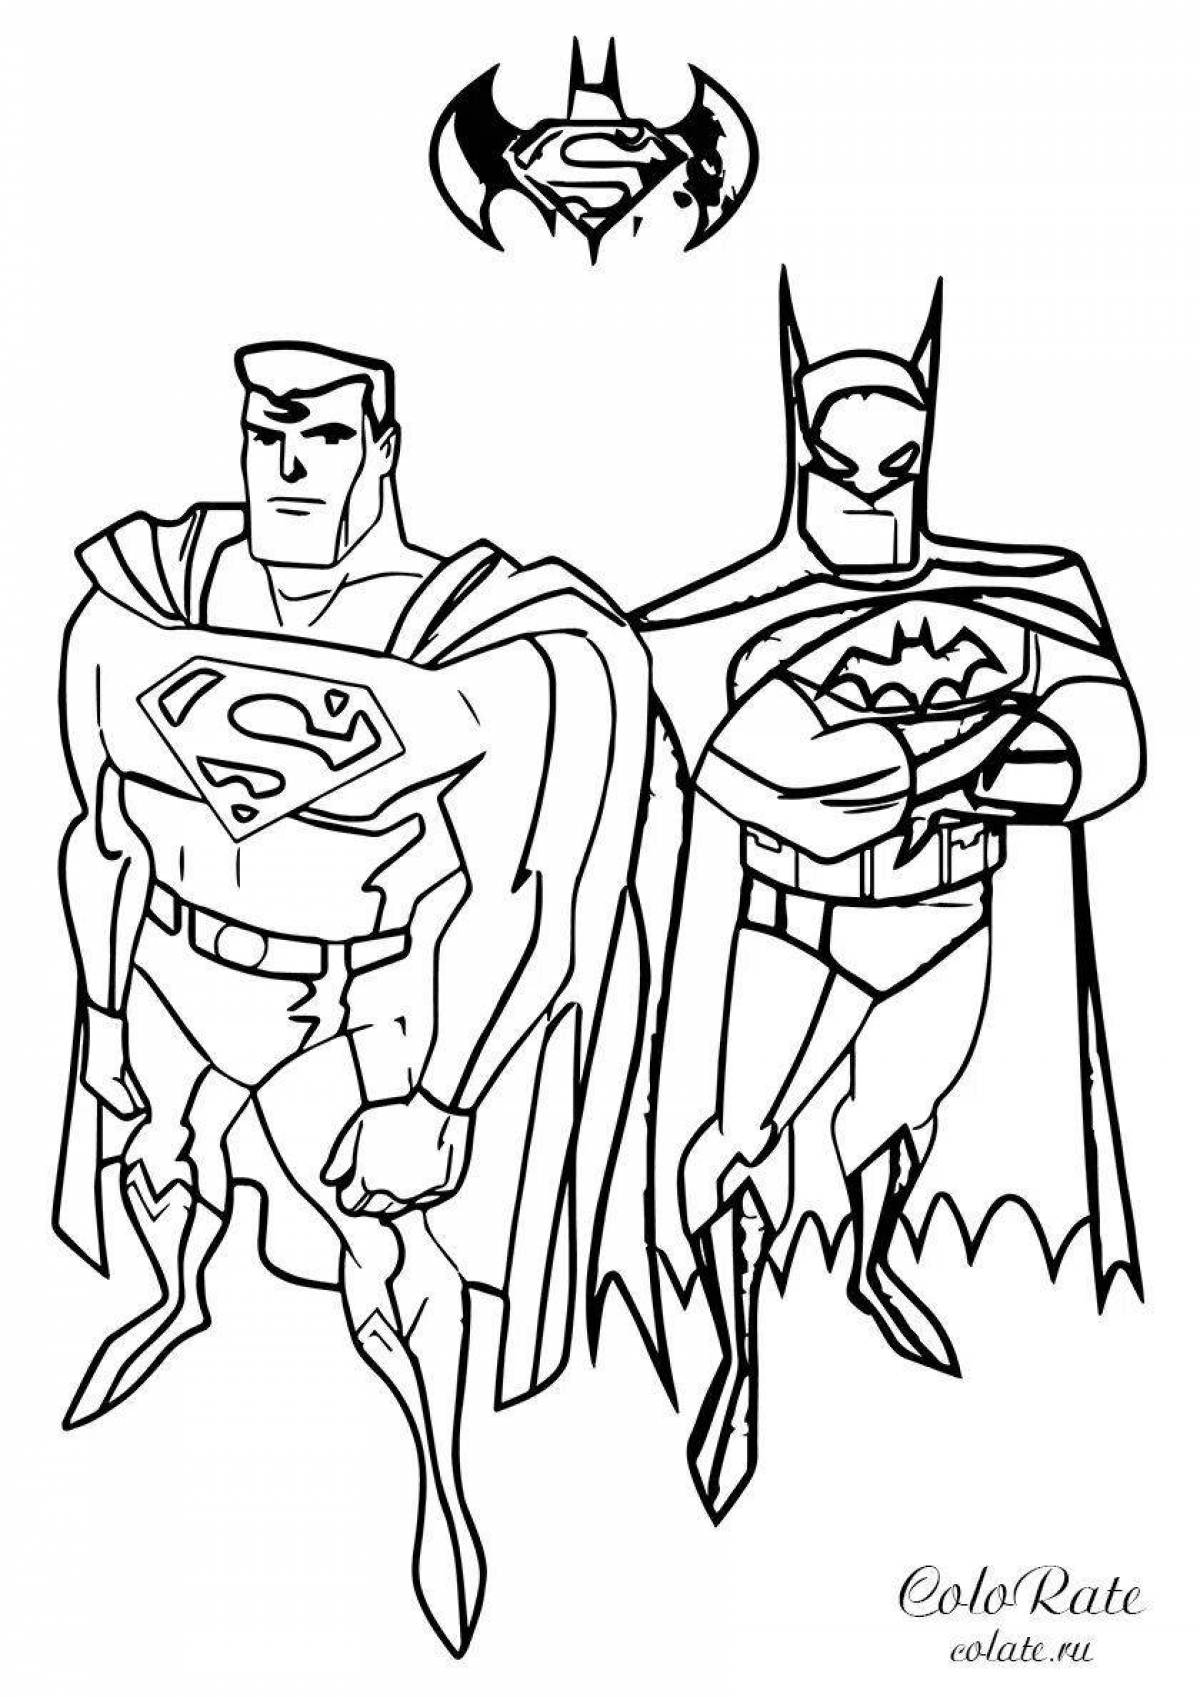 Comic superman coloring book for 3-4 year olds